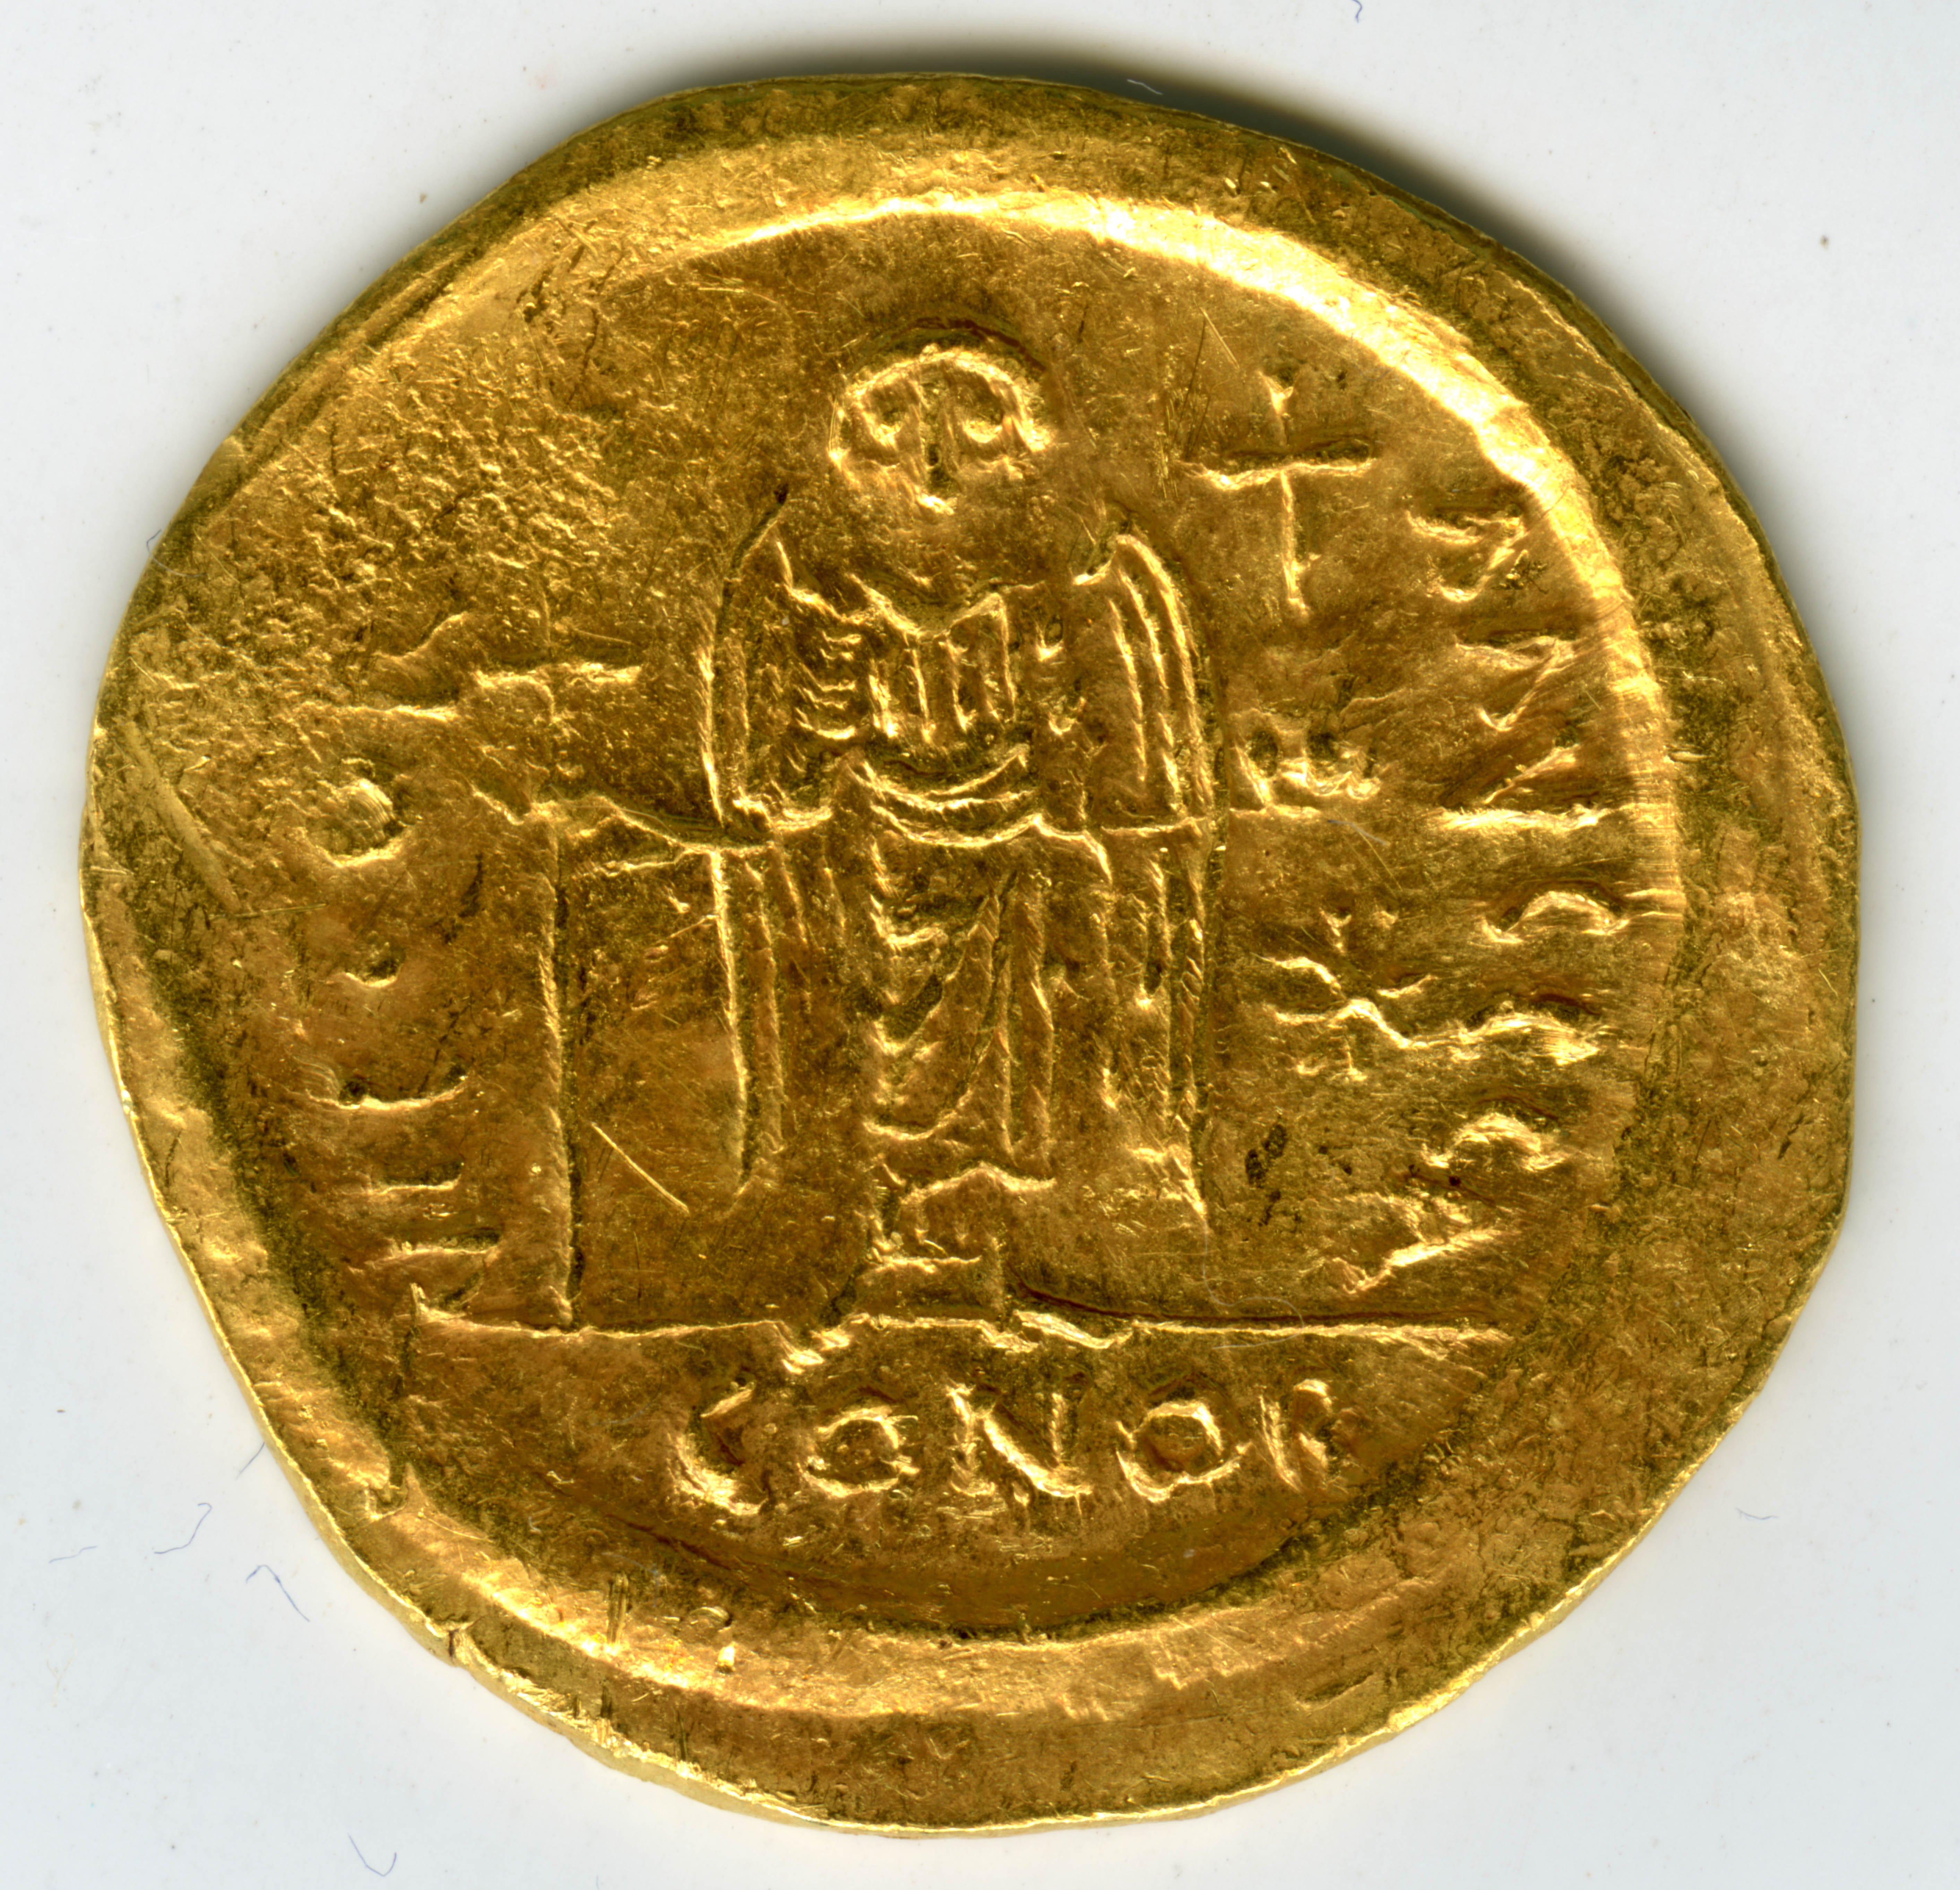 Justinian I Solidus (538 CE), Reverse